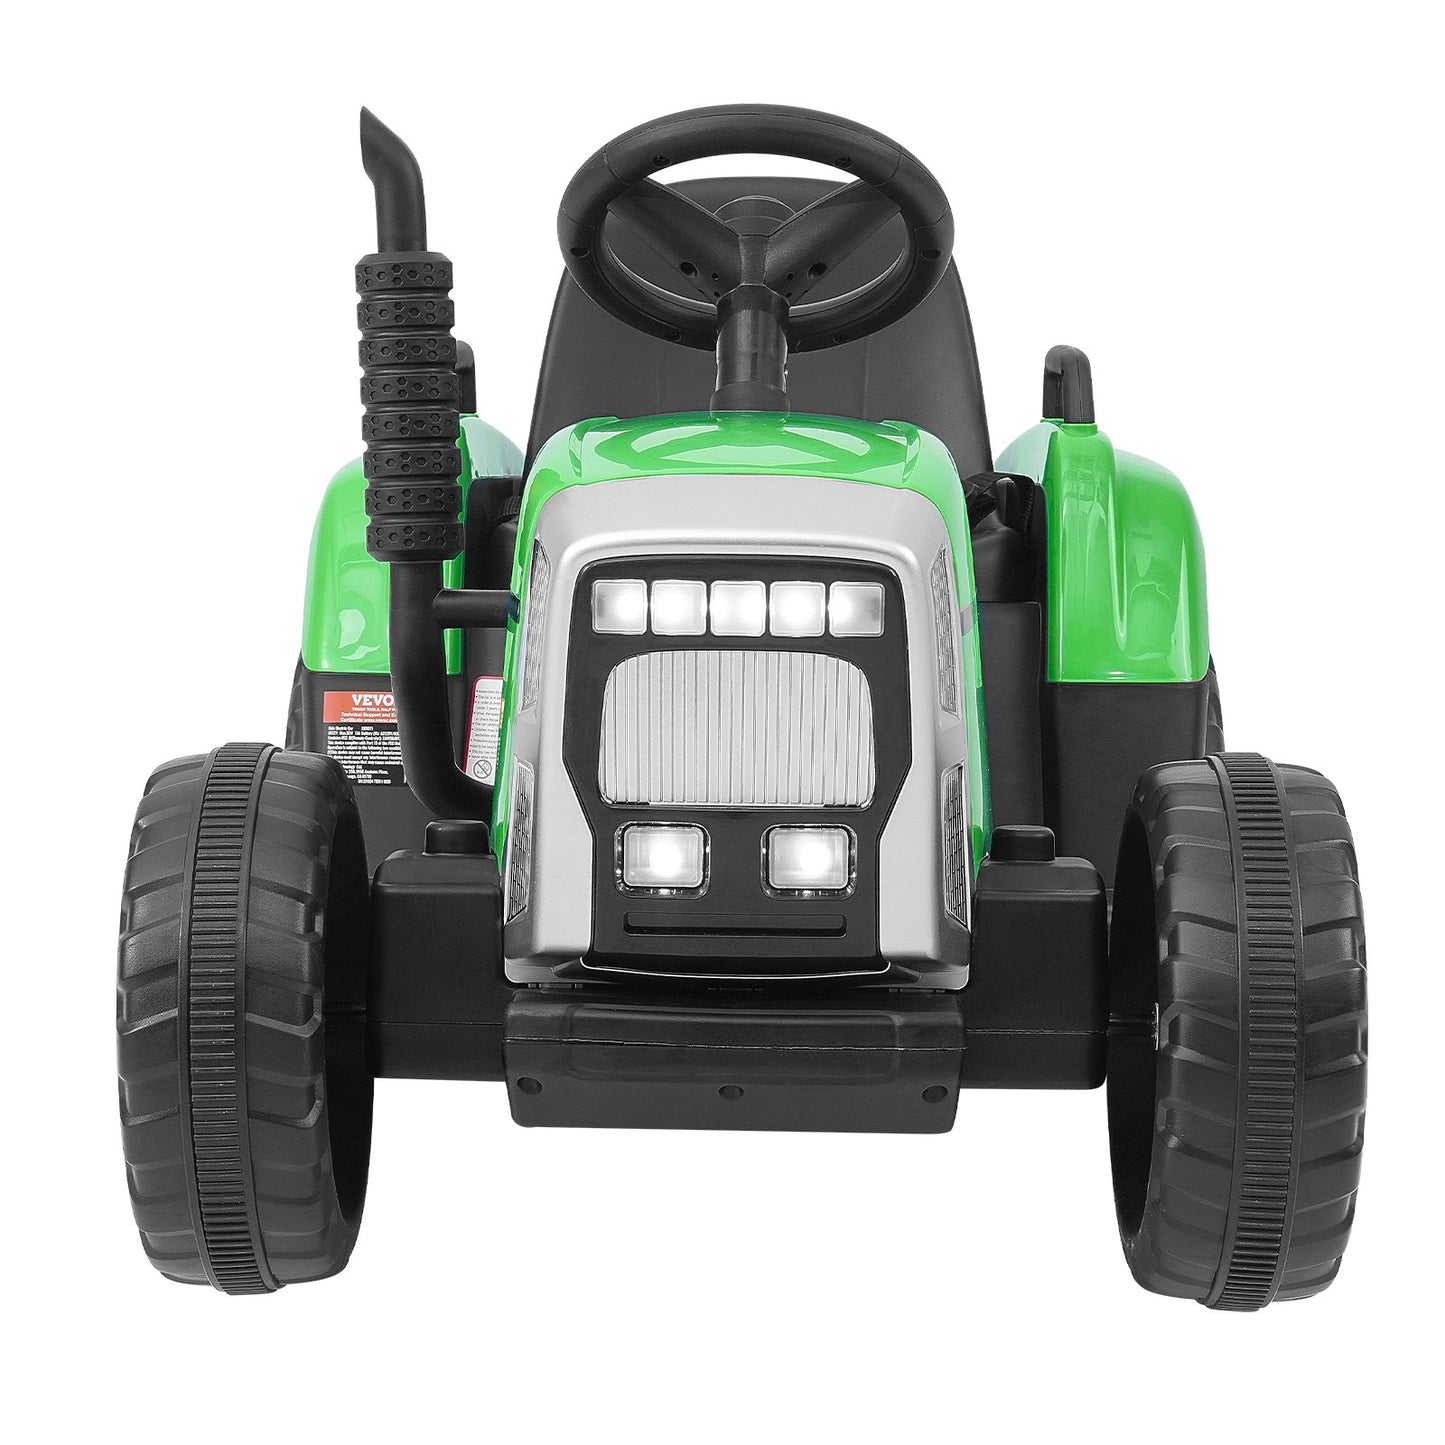 VEVOR Kids Ride on Tractor 12V Electric Toy Tractor with Trailer Remote Control-8